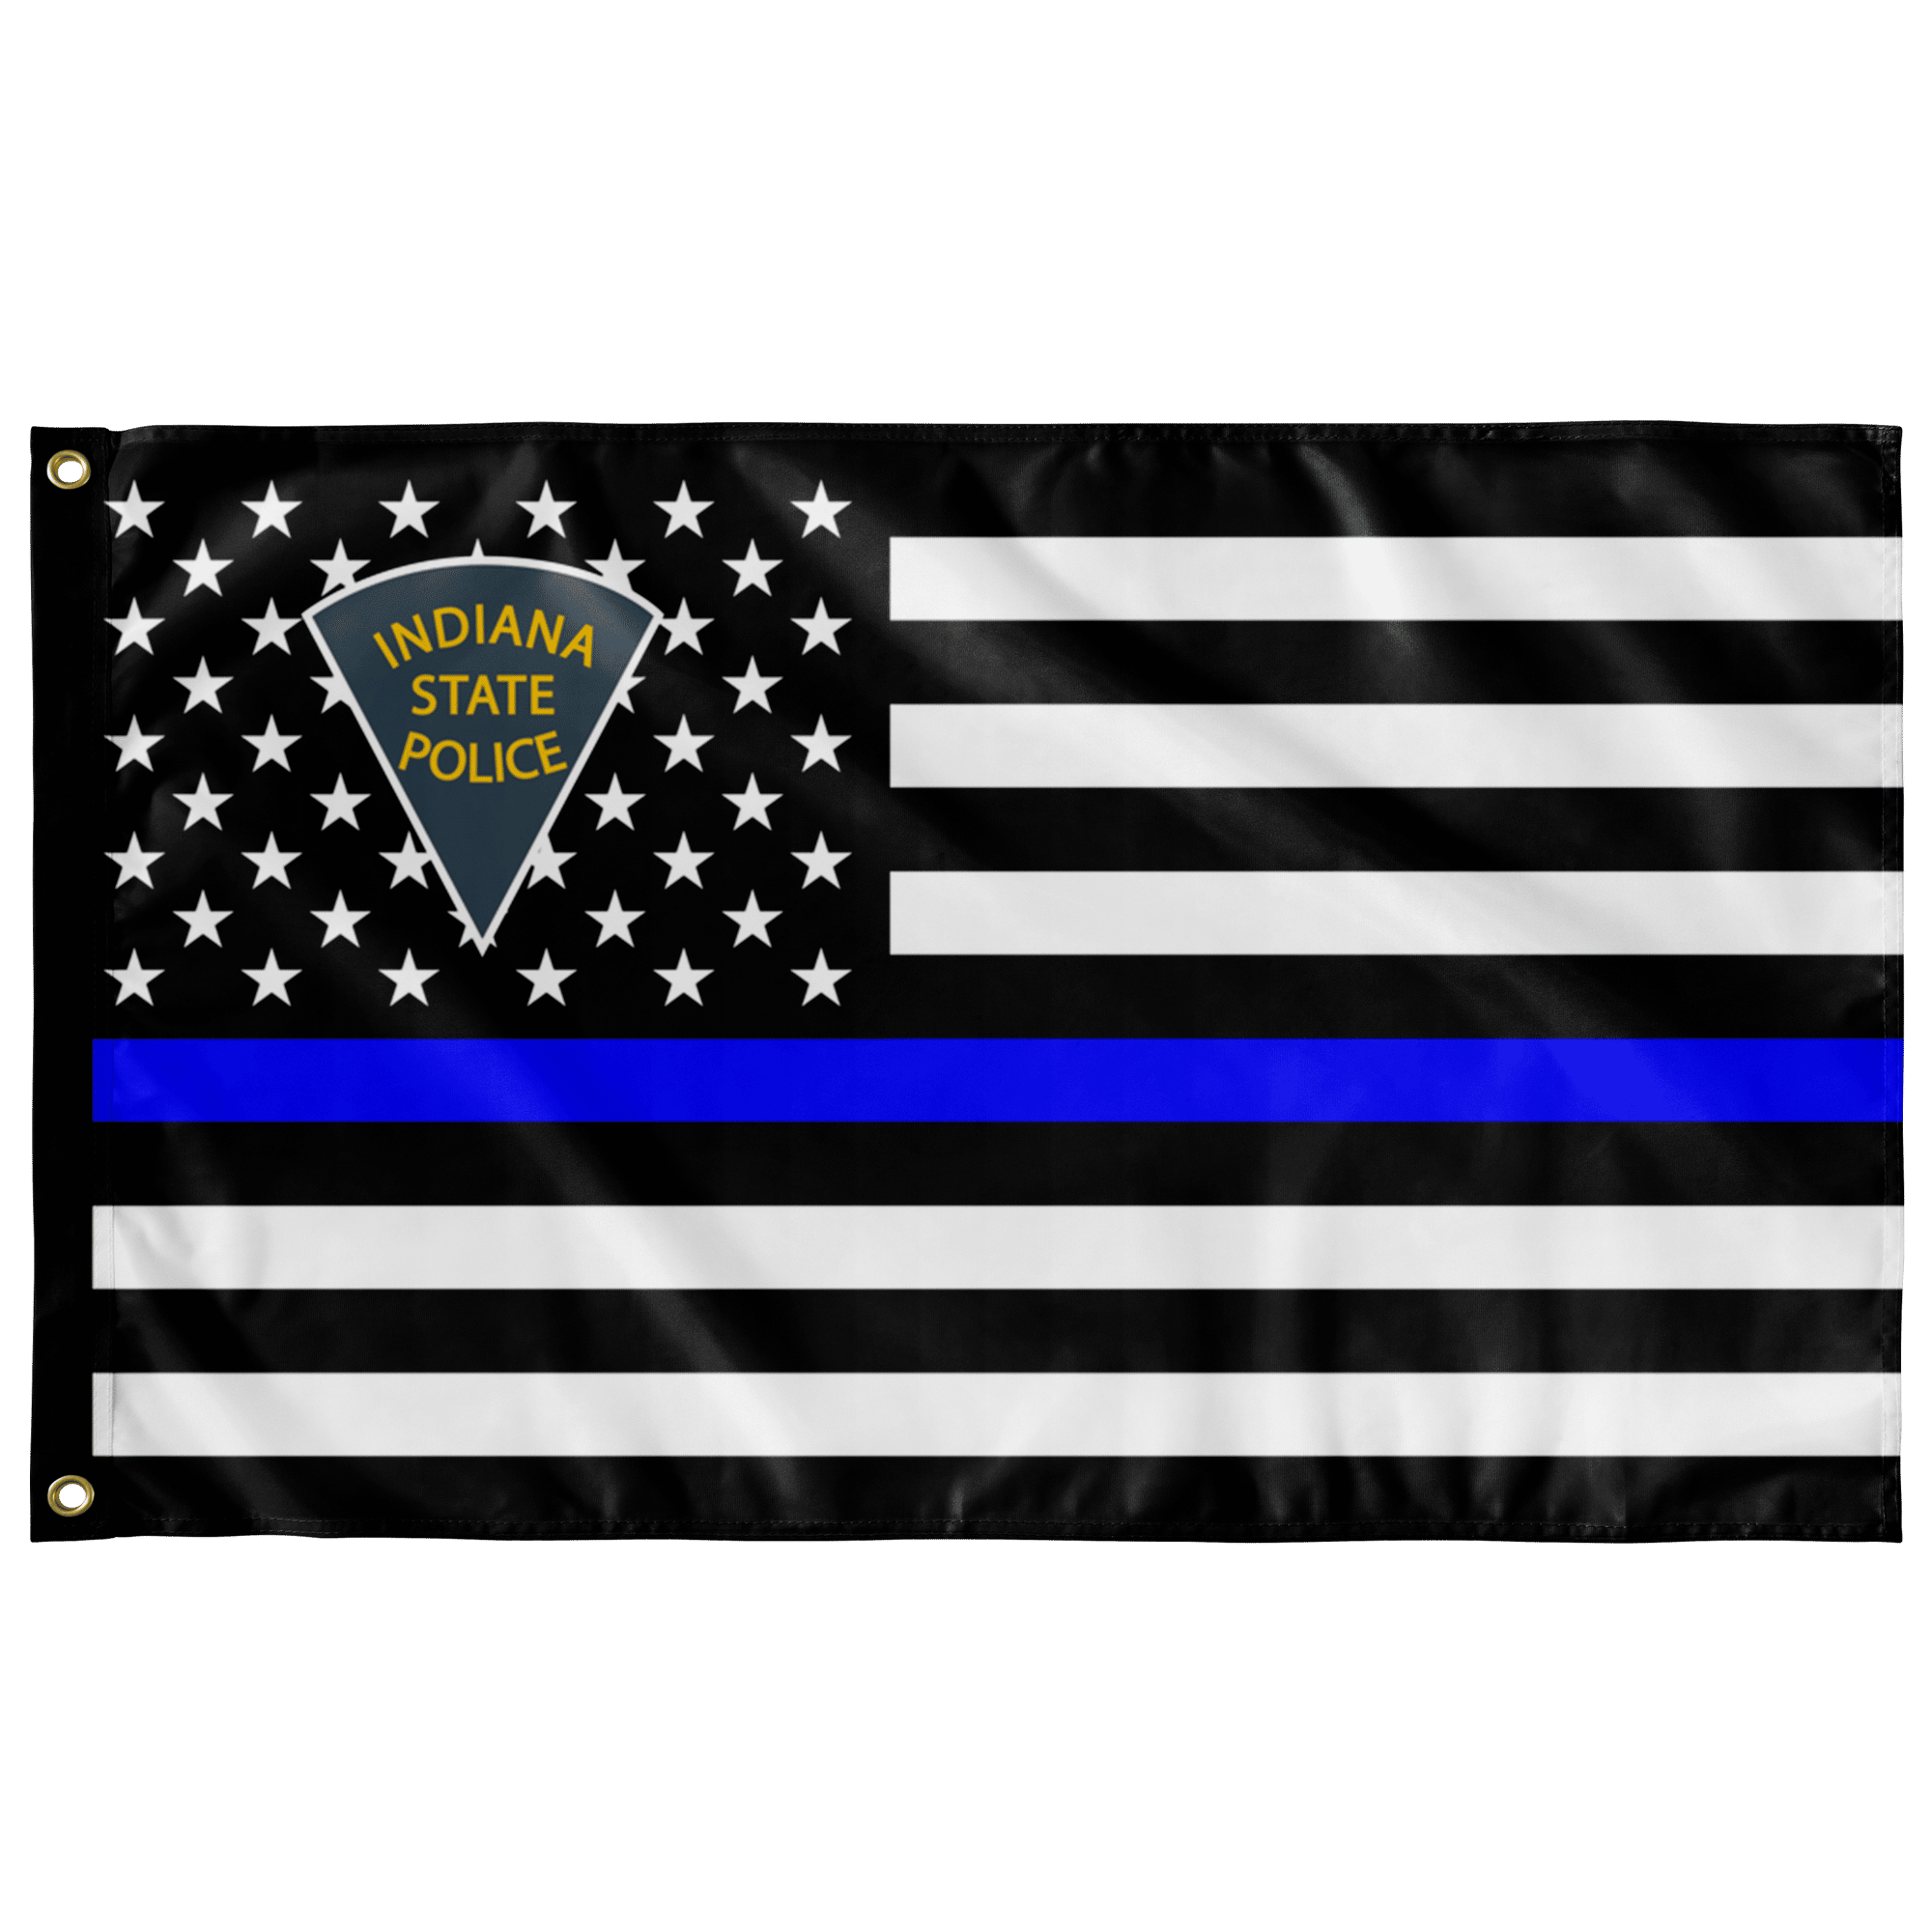 Indiana state police flag